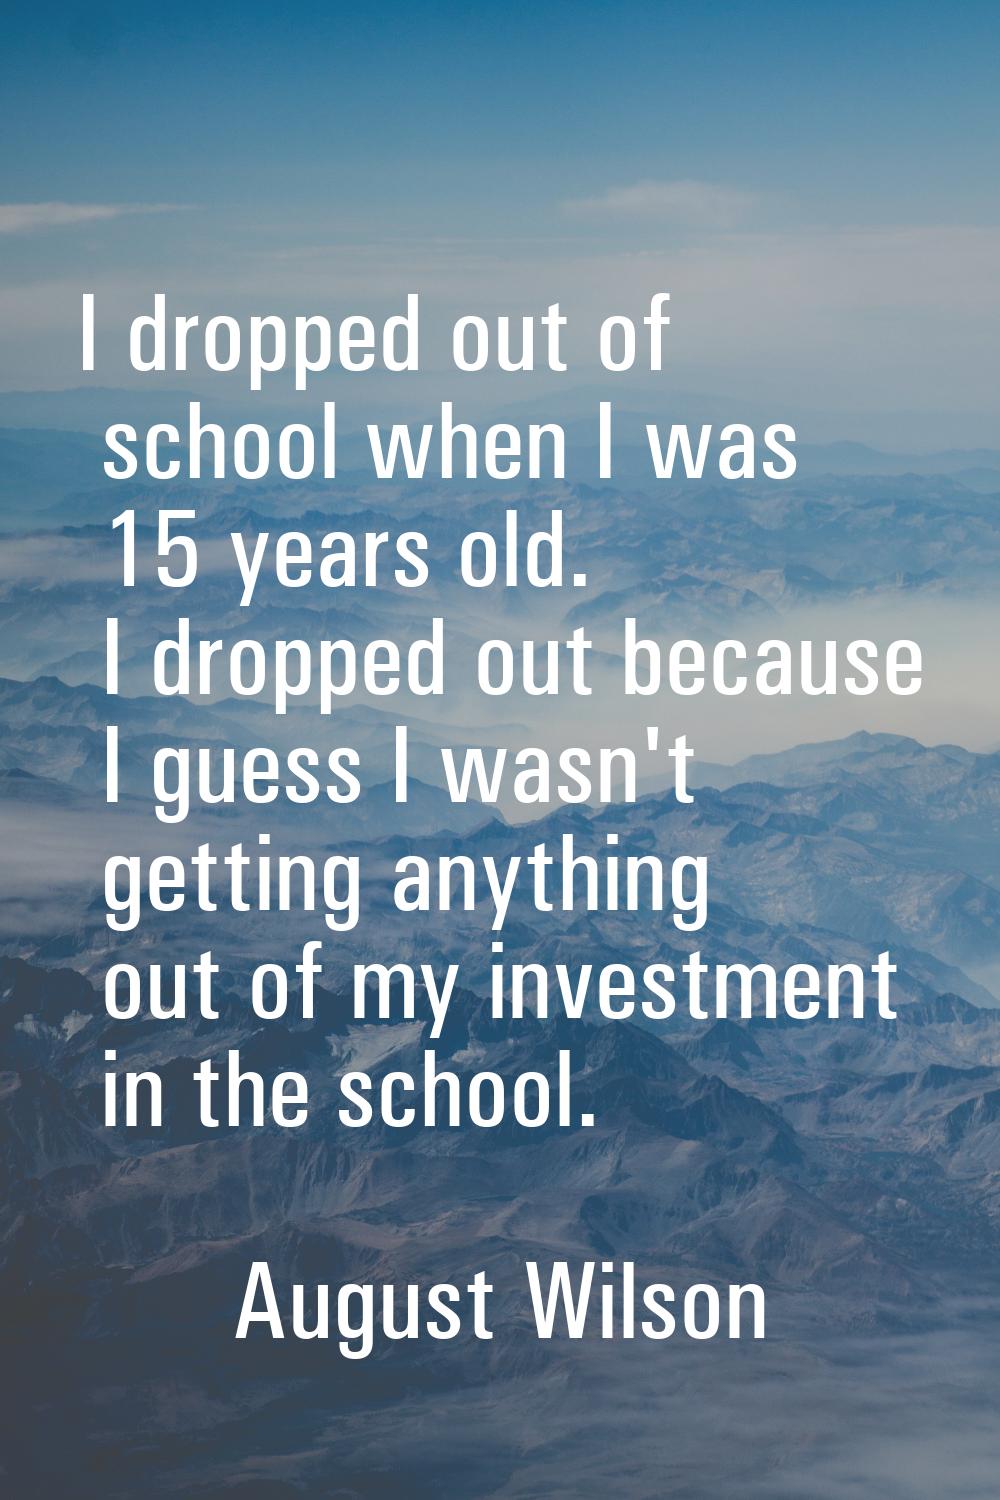 I dropped out of school when I was 15 years old. I dropped out because I guess I wasn't getting any